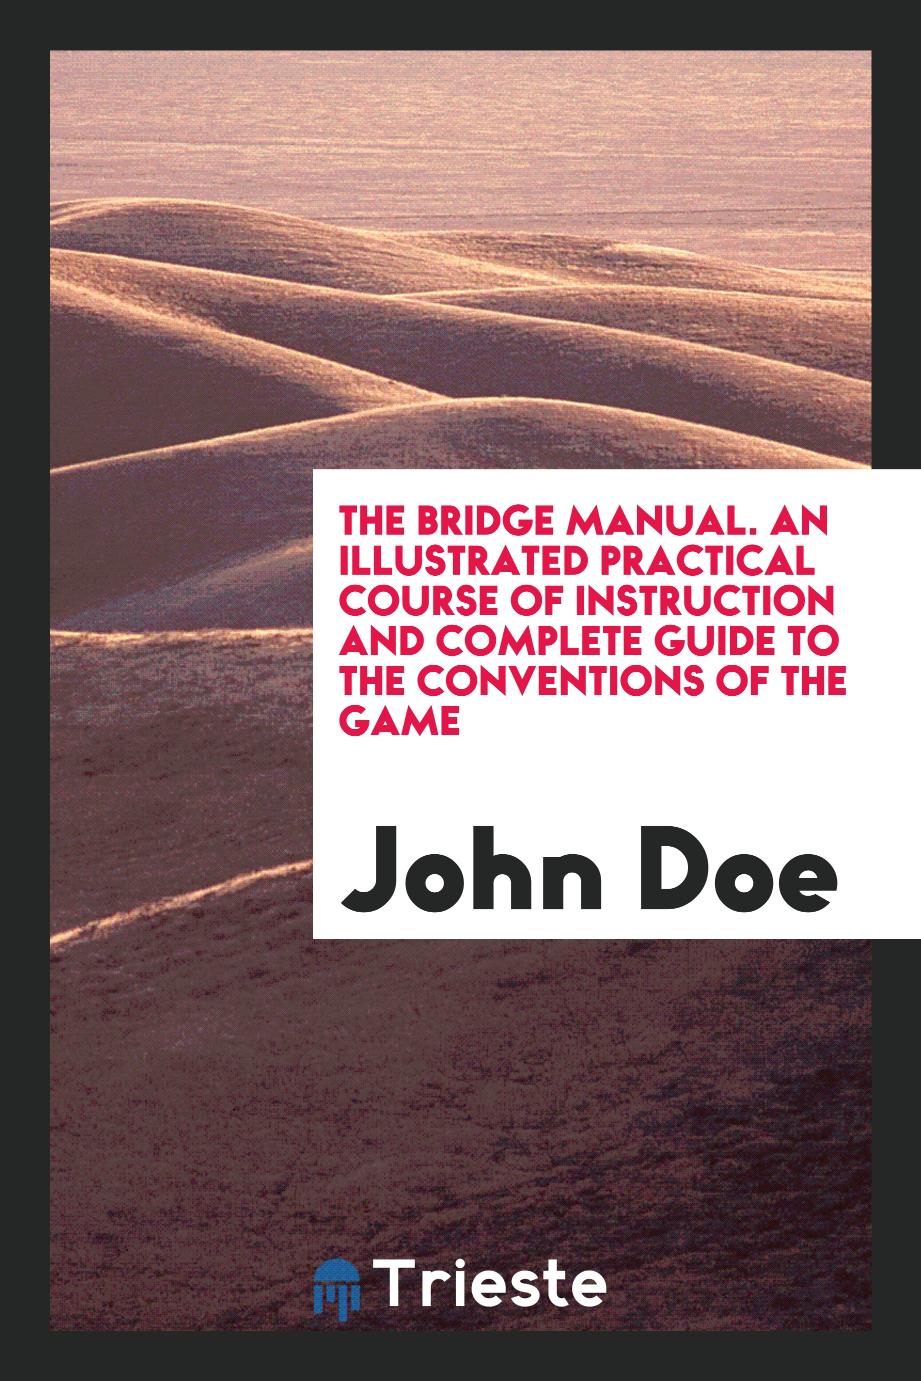 The Bridge Manual. An Illustrated Practical Course of Instruction and Complete Guide to the Conventions of the Game